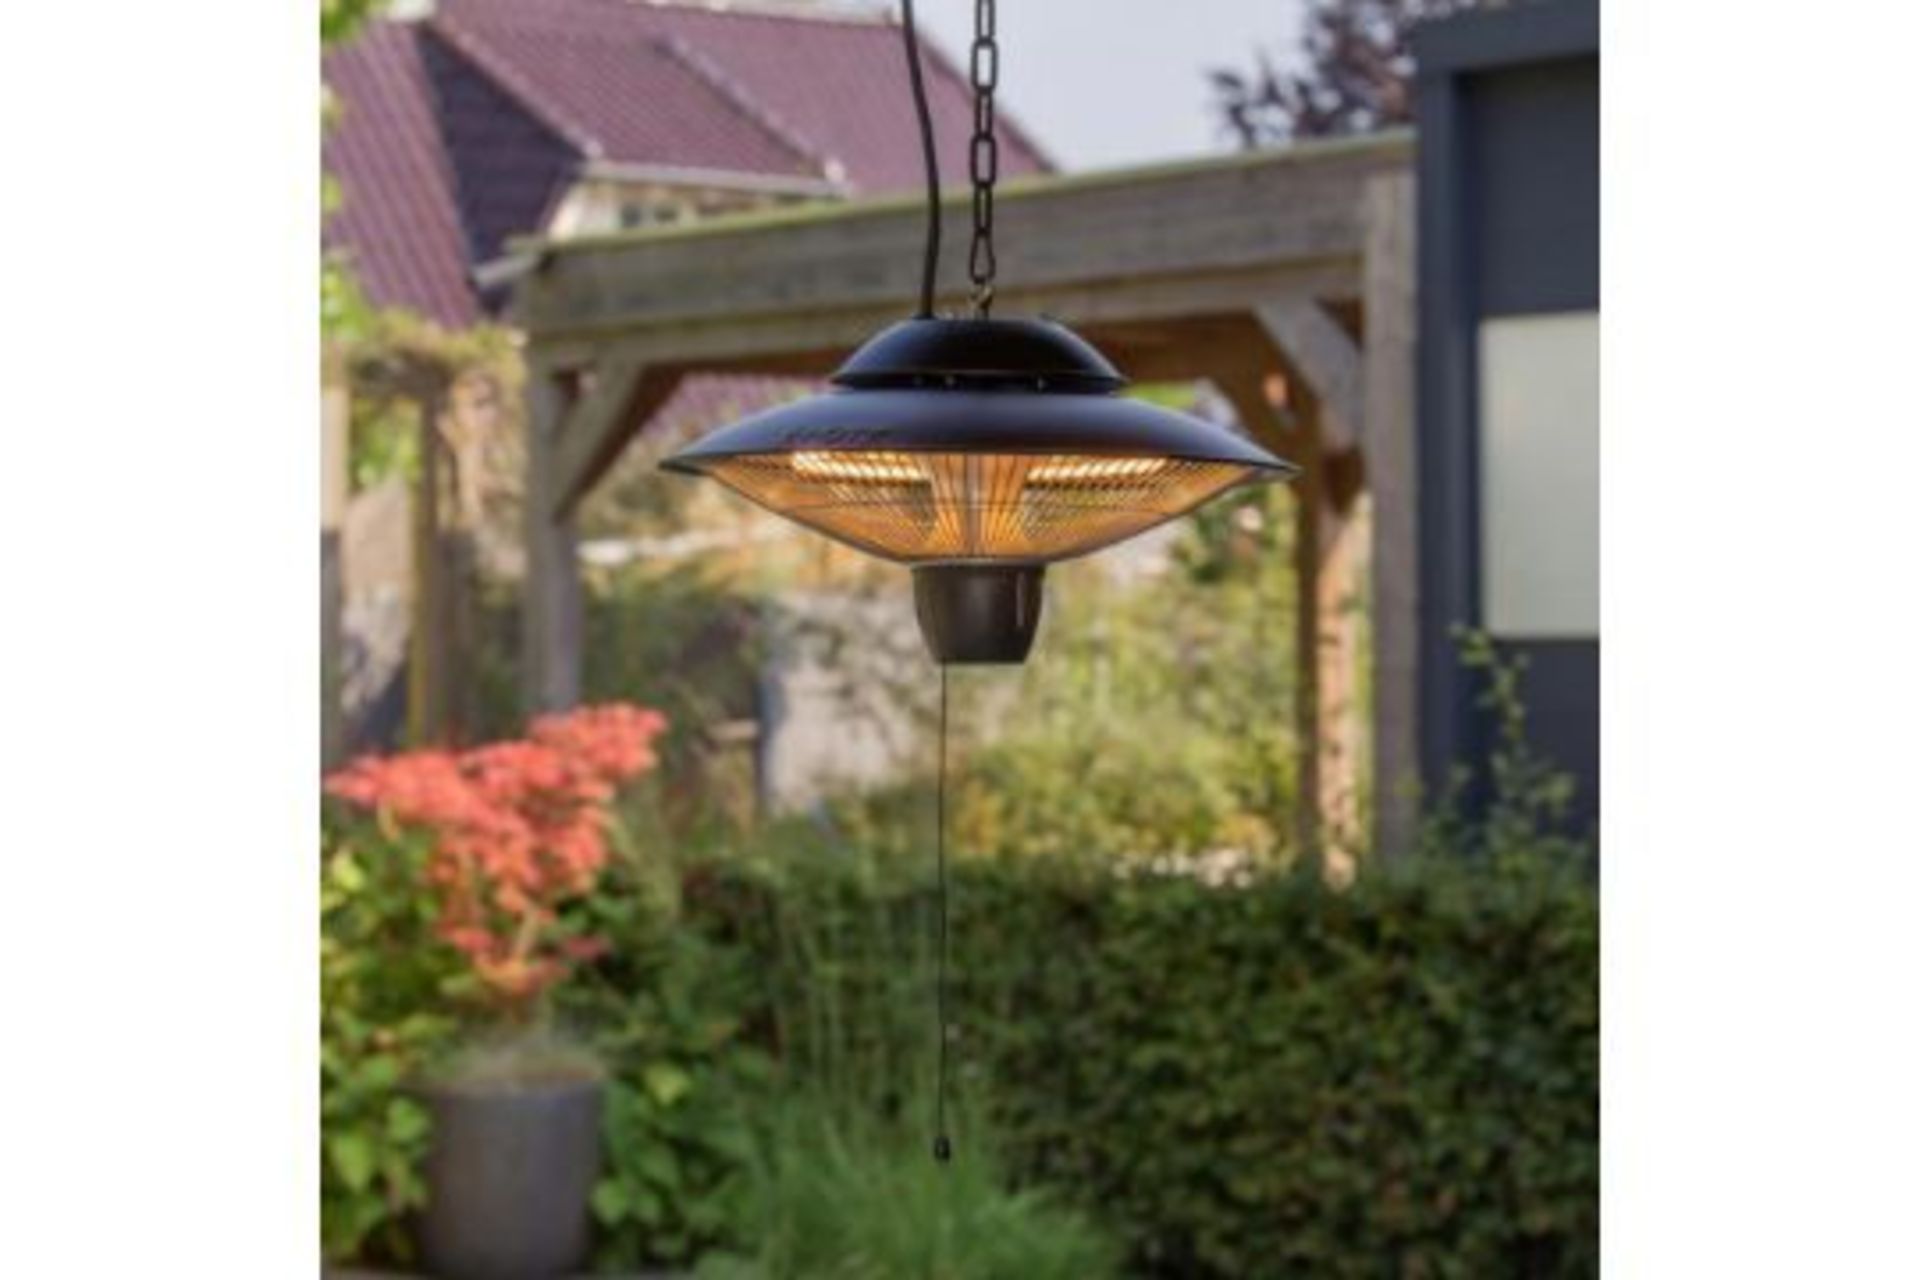 Brand New The Sunred Heater Barcelona Hanging 1500W RRP £299.A high quality and efficient outdoor - Image 3 of 3